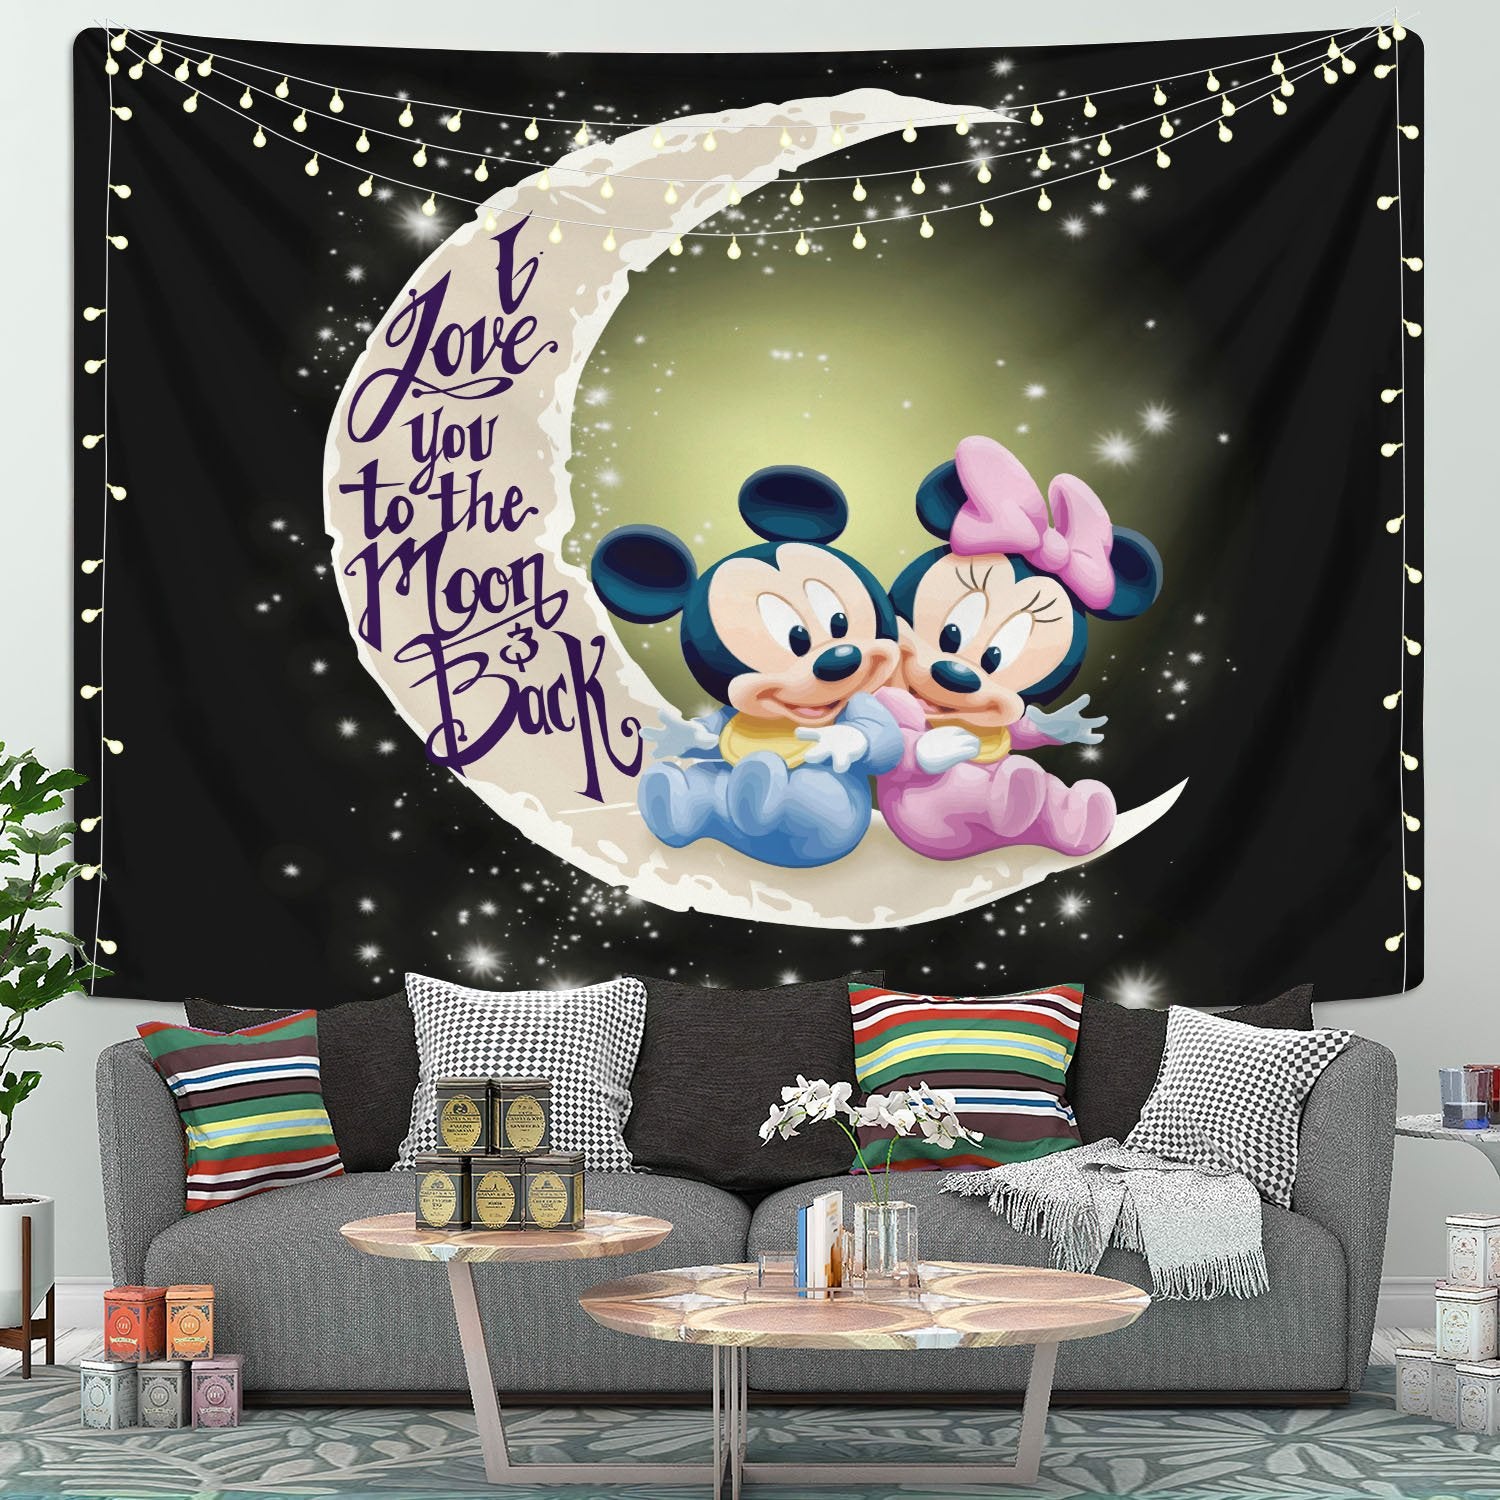 Mice Couple Love You To The Moon Tapestry Room Decor